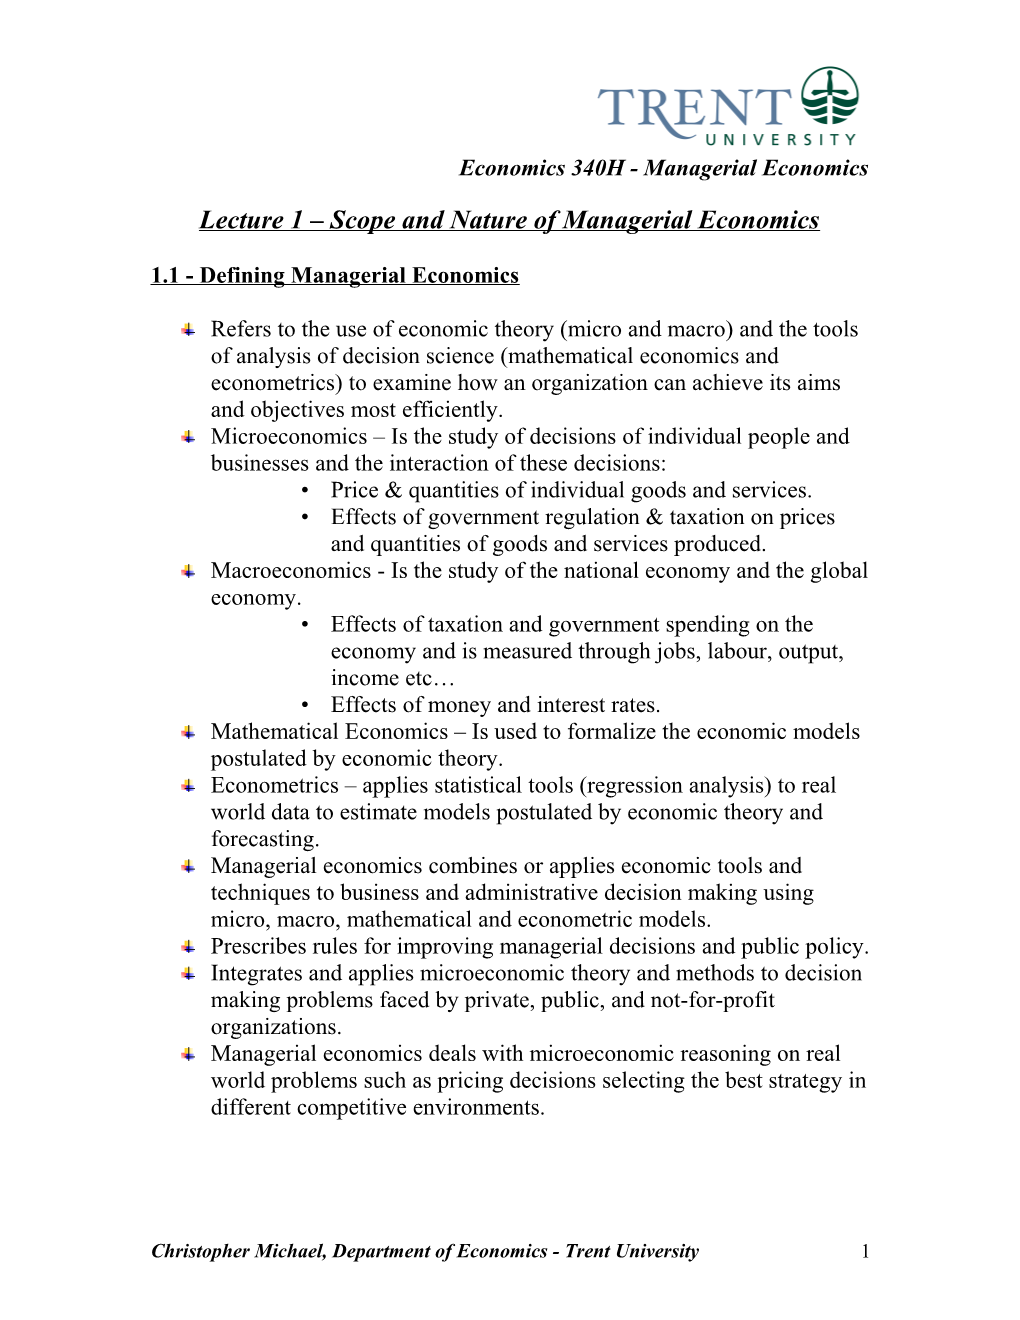 Lecture 1 – Scope And Nature Of Managerial Economics